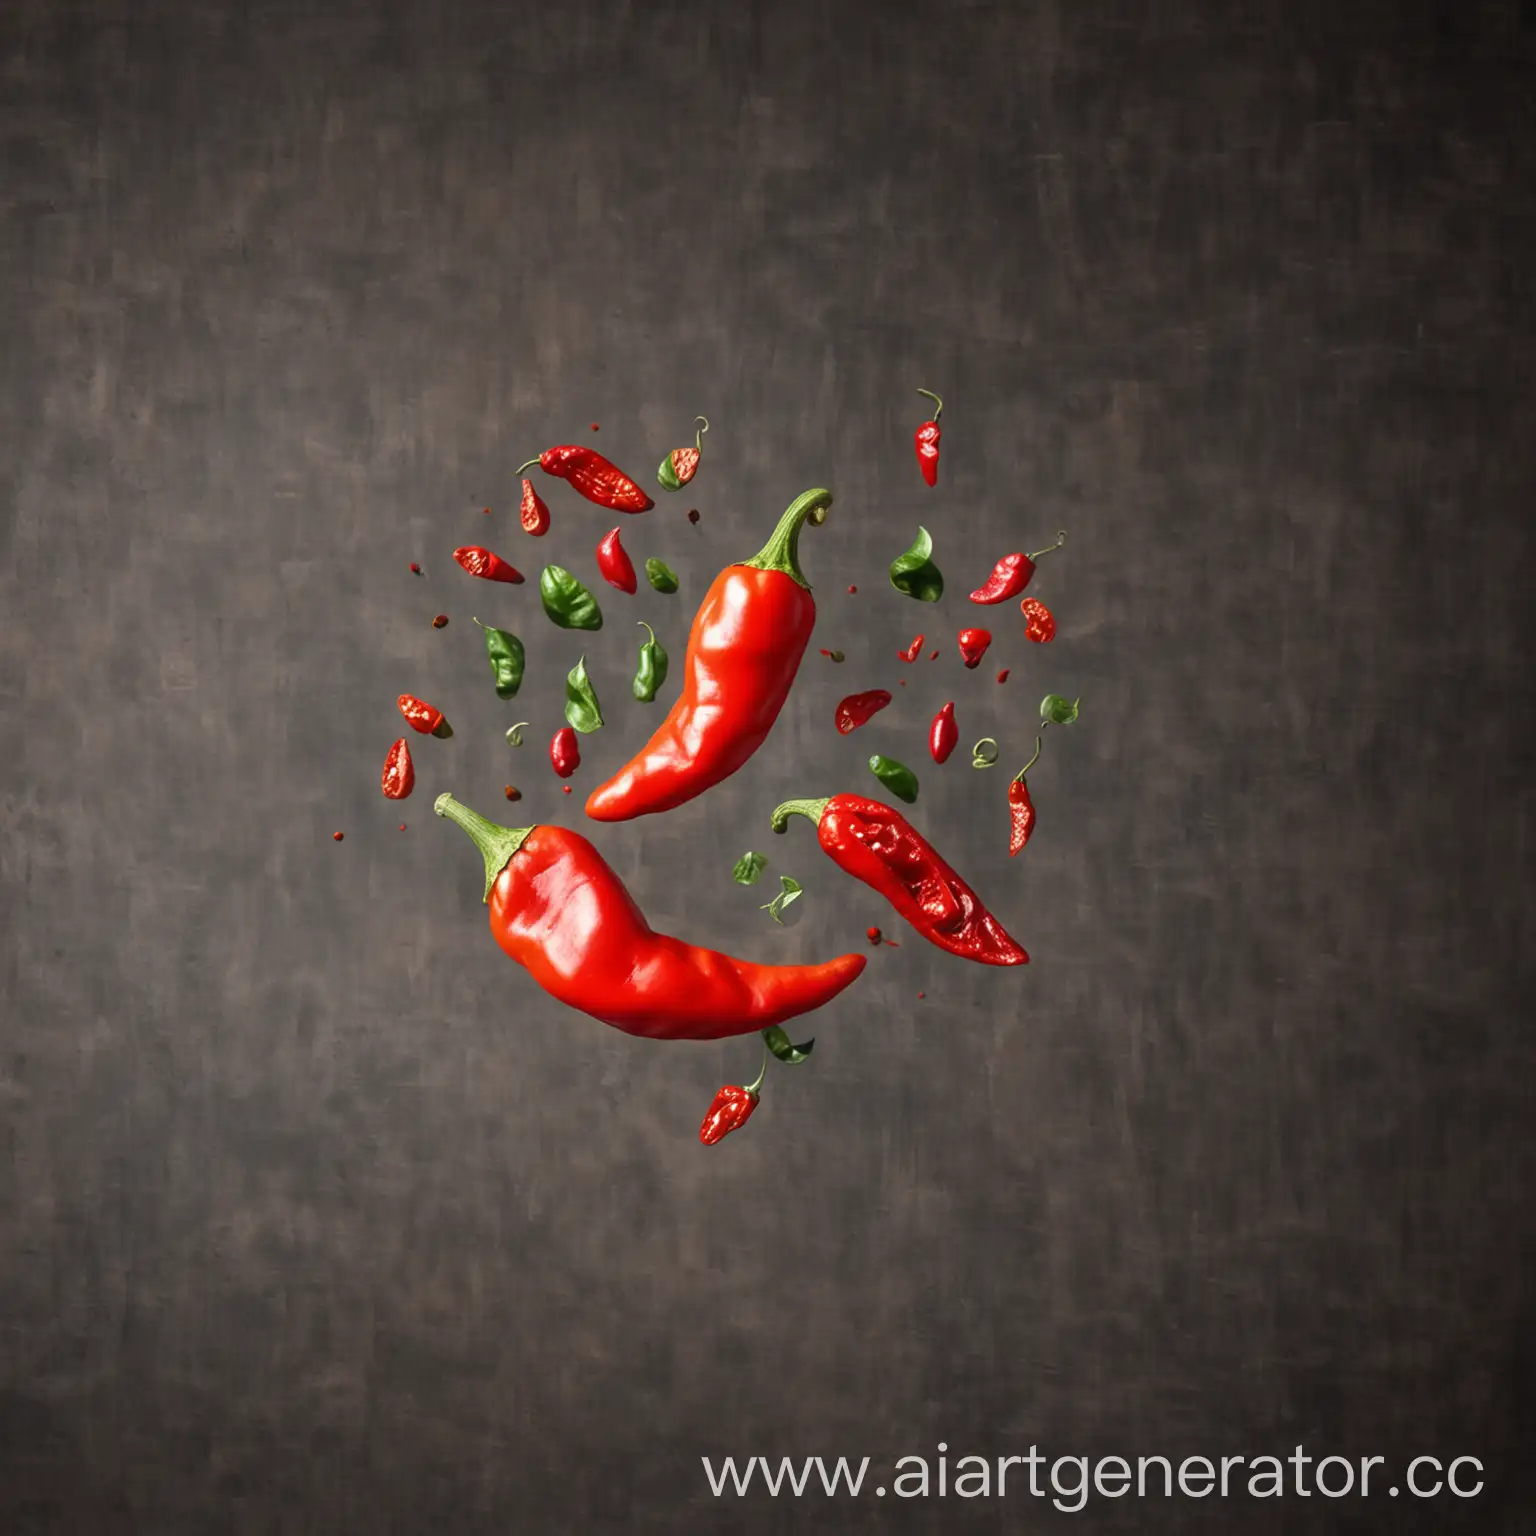 Vibrant-Paprika-and-Chili-Peppers-Soaring-Against-a-Dramatic-Backdrop